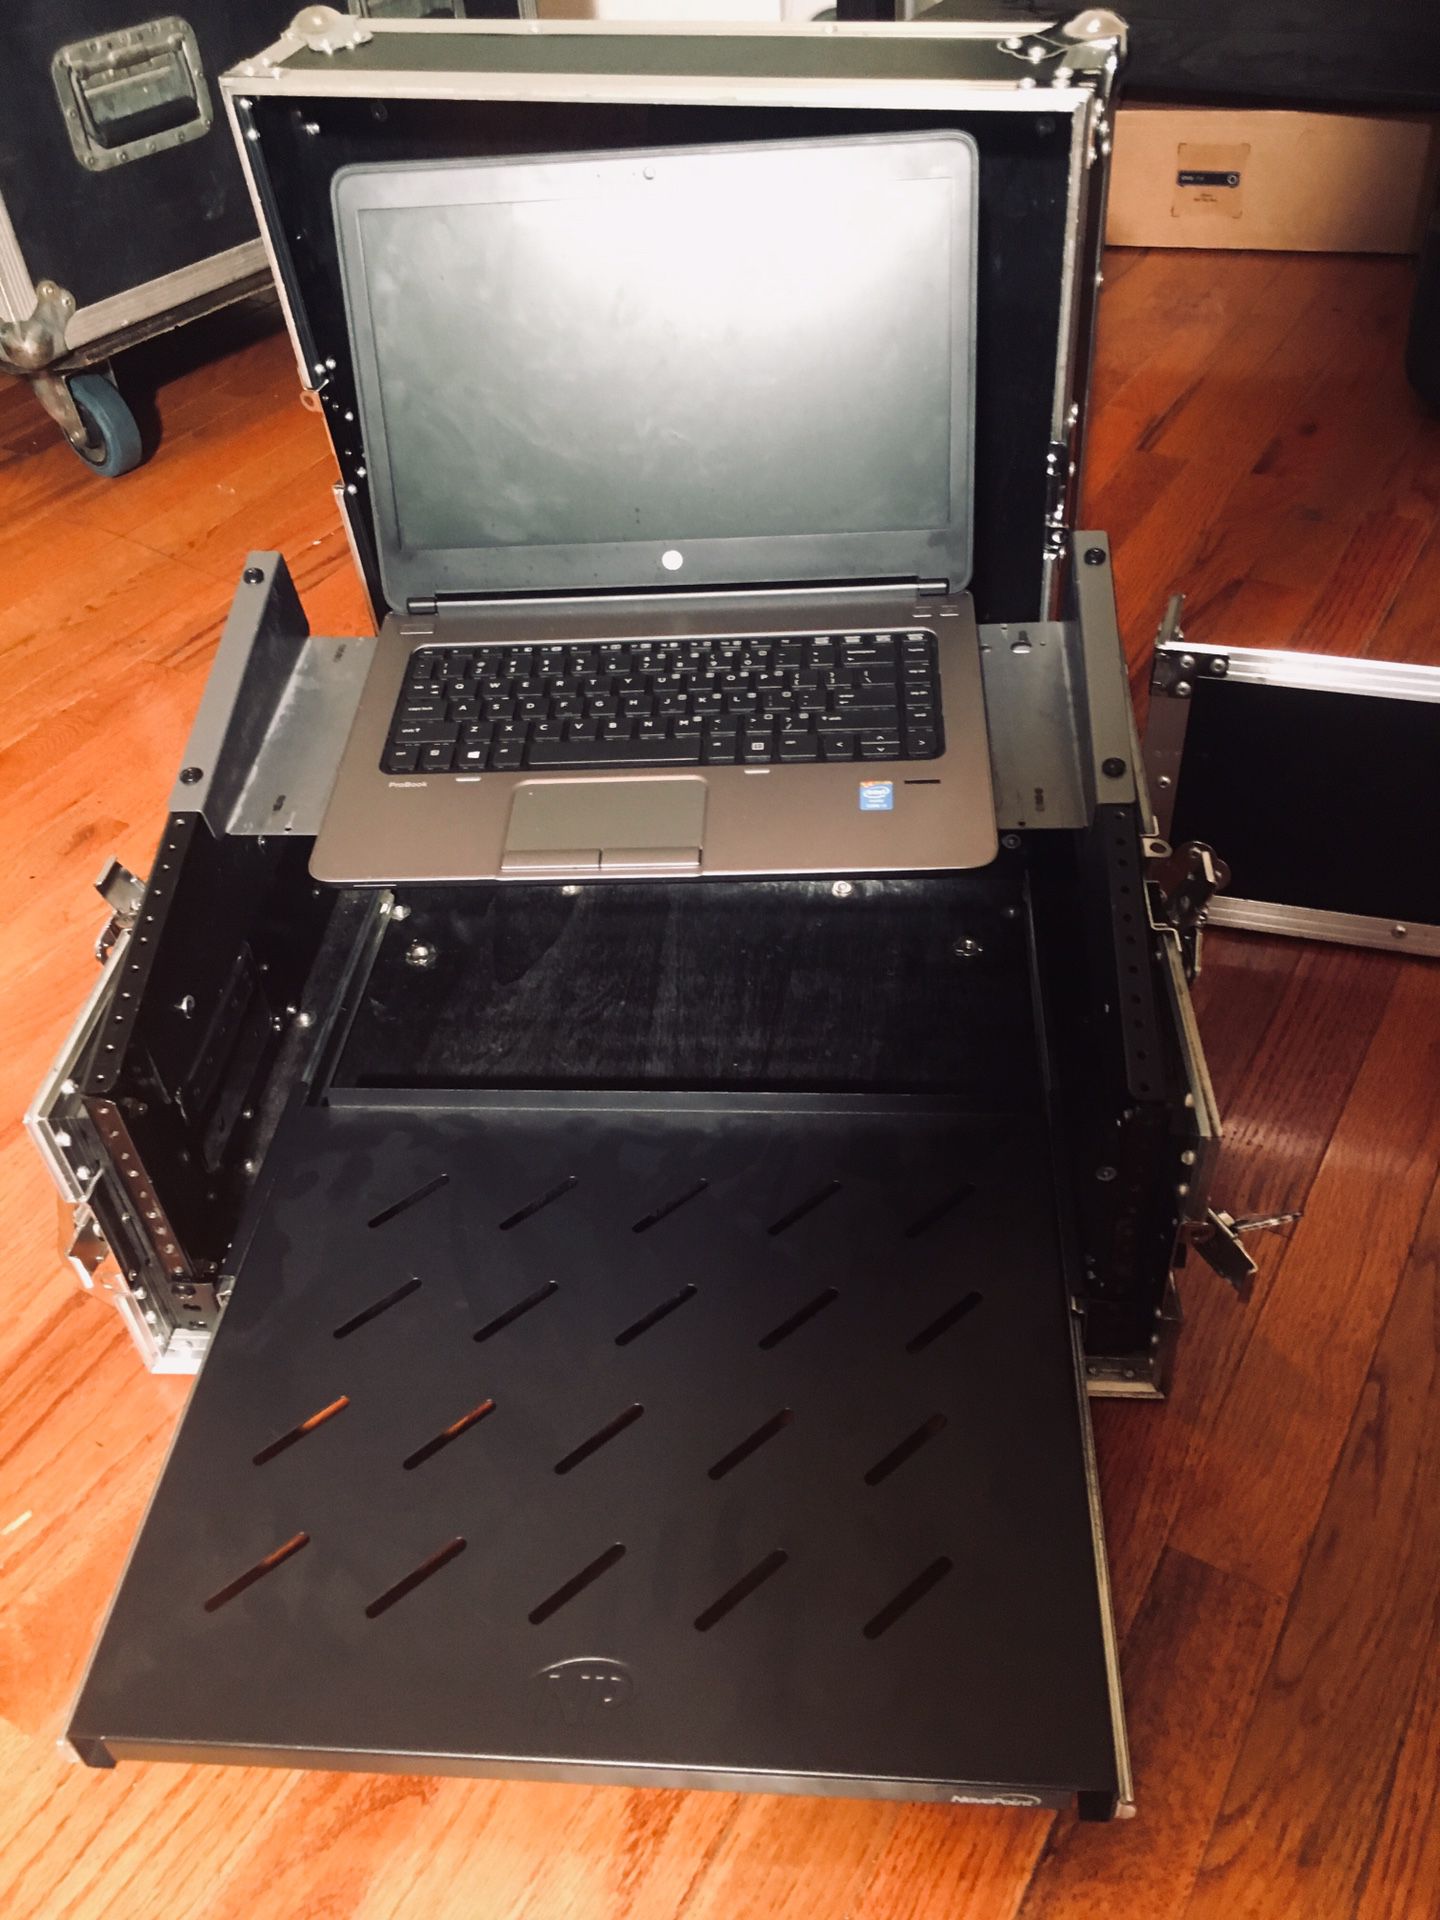 DJ laptop and mixer flight case. Comes with rack mountable 8 channel alesis mixer!